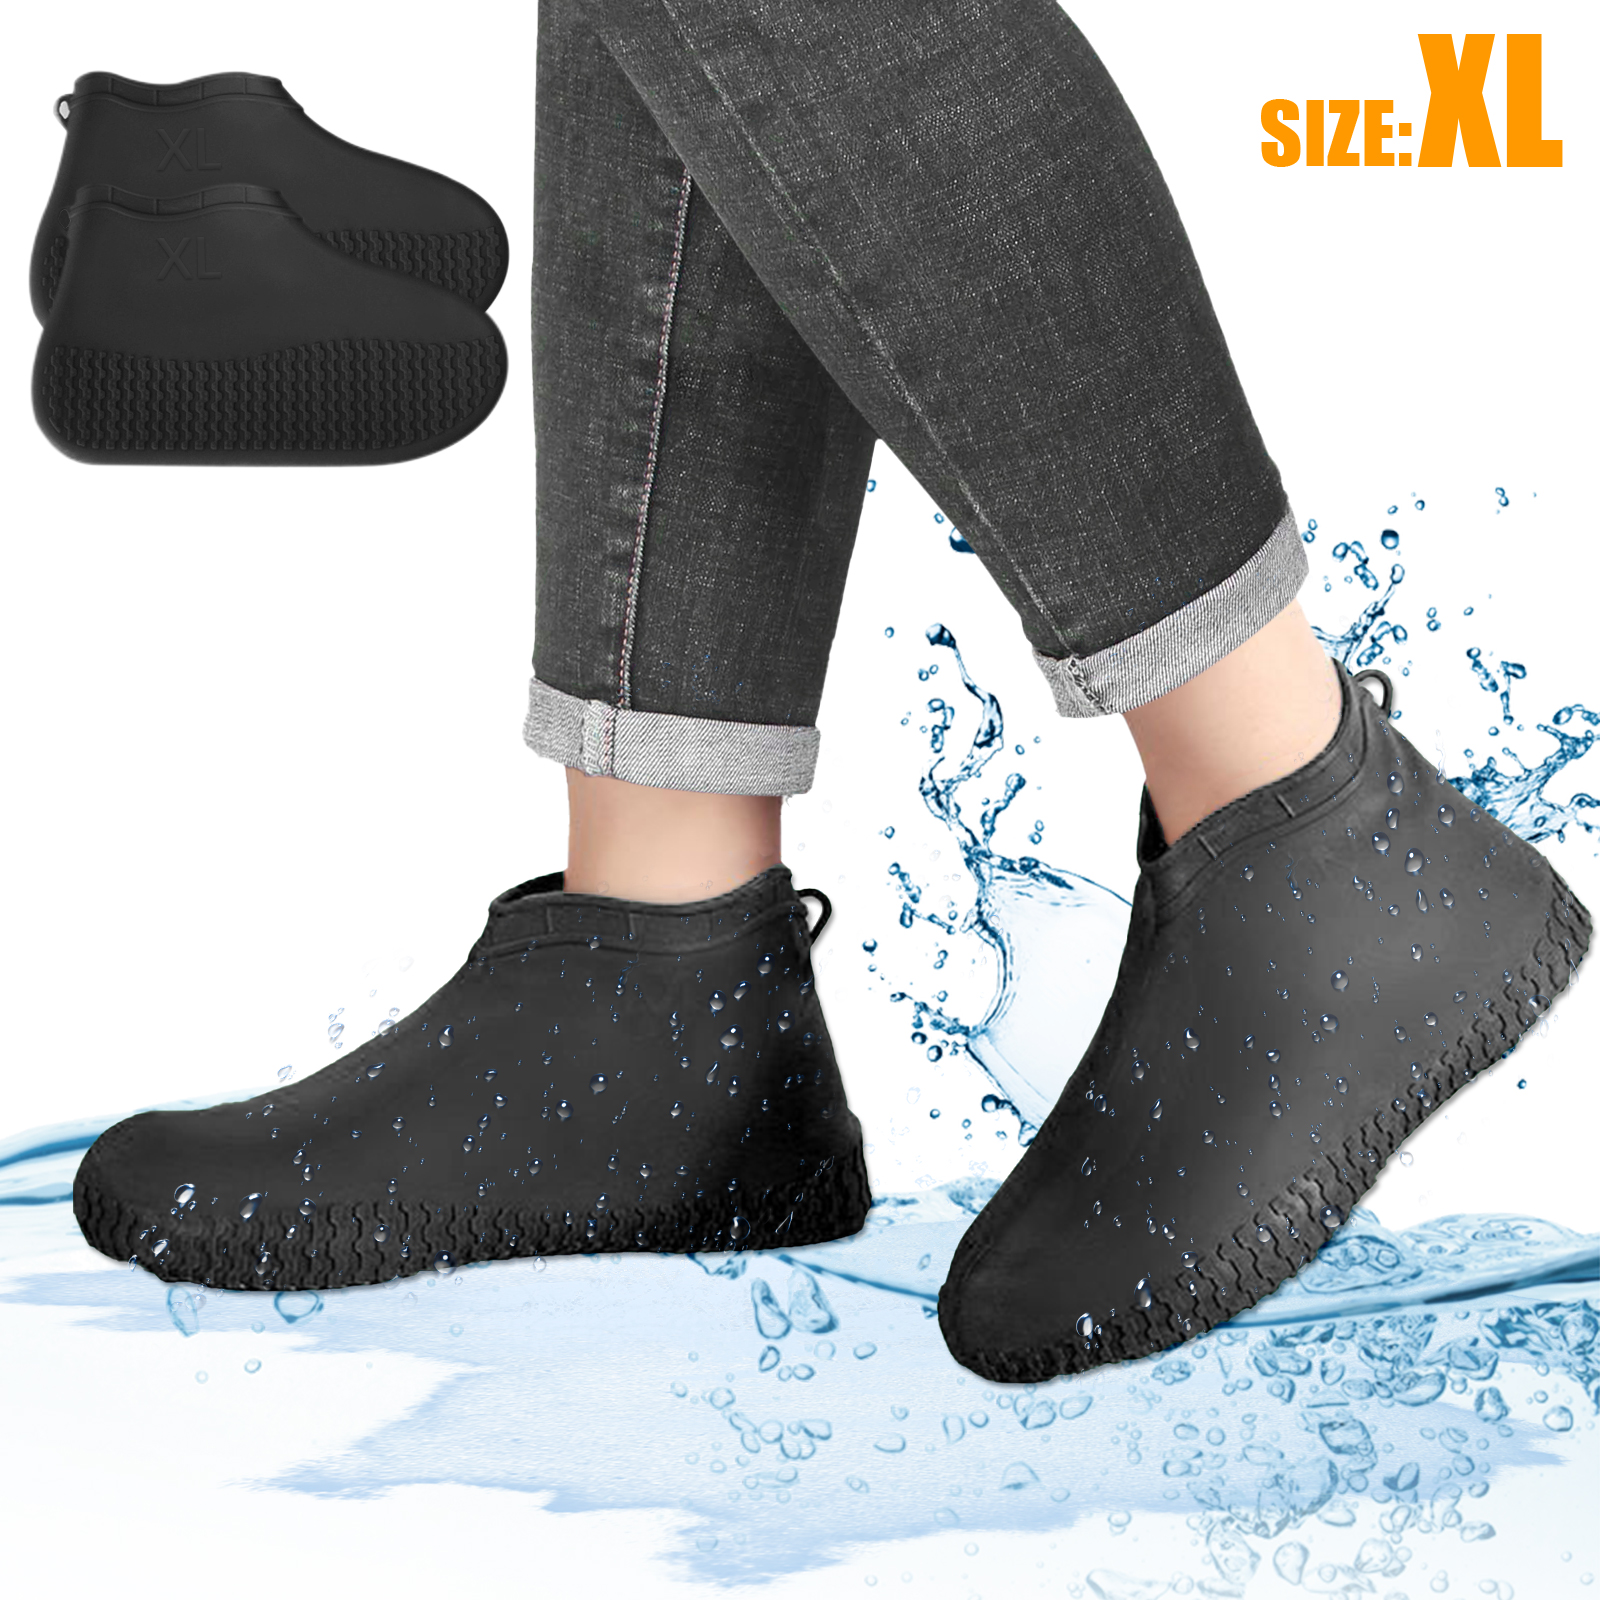 Overshoes Covers Silicone Recyclable Shoe Protector Rain Boot Waterproof Cover 